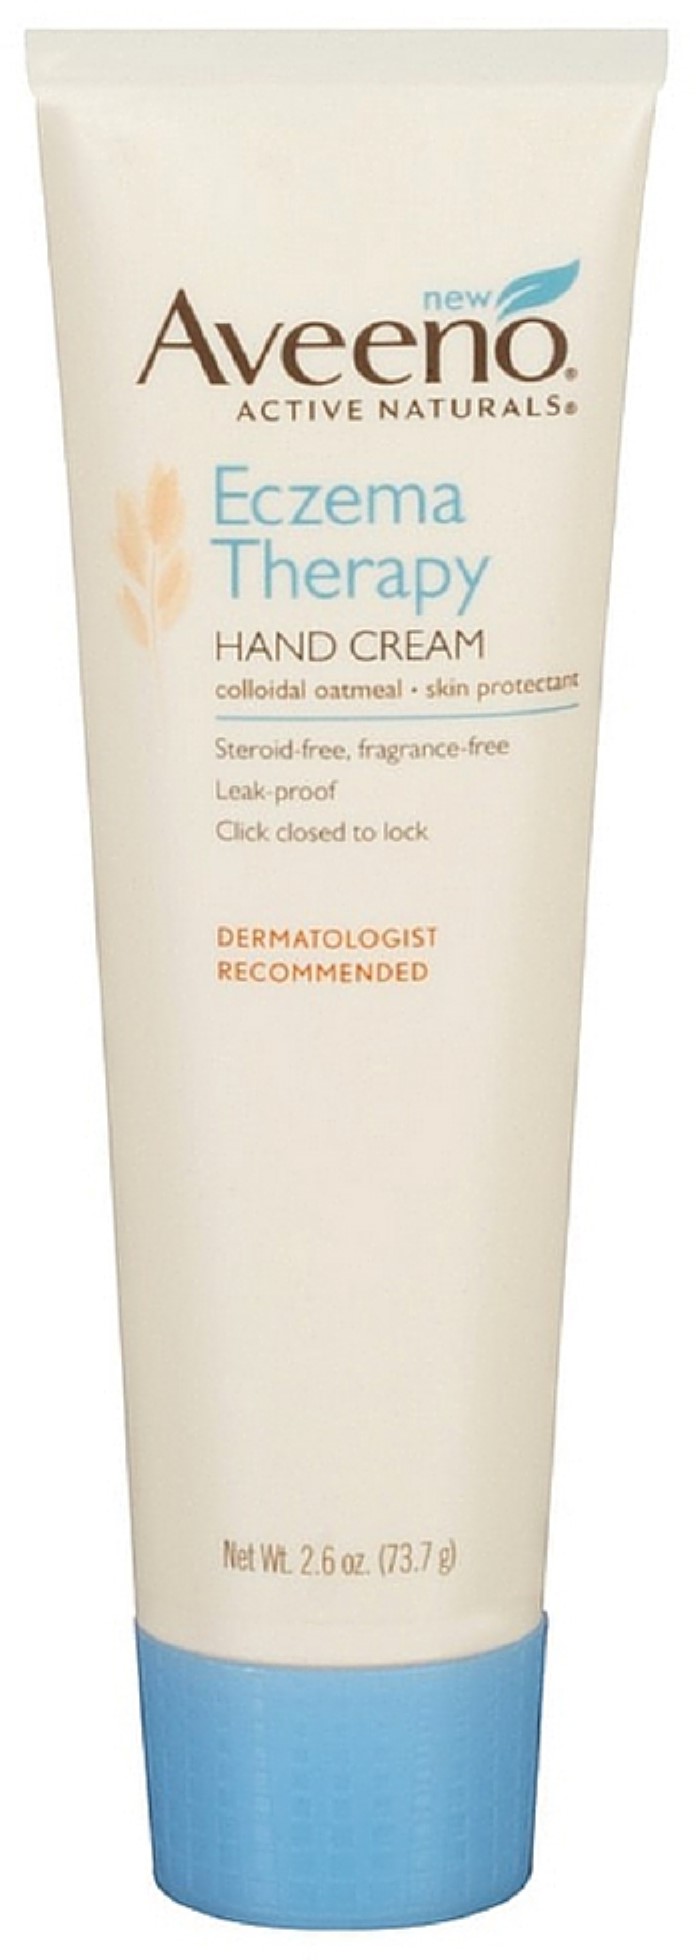 AVEENO Active Naturals Eczema Therapy Hand Cream 2.60 oz (Pack of 4) - image 1 of 4